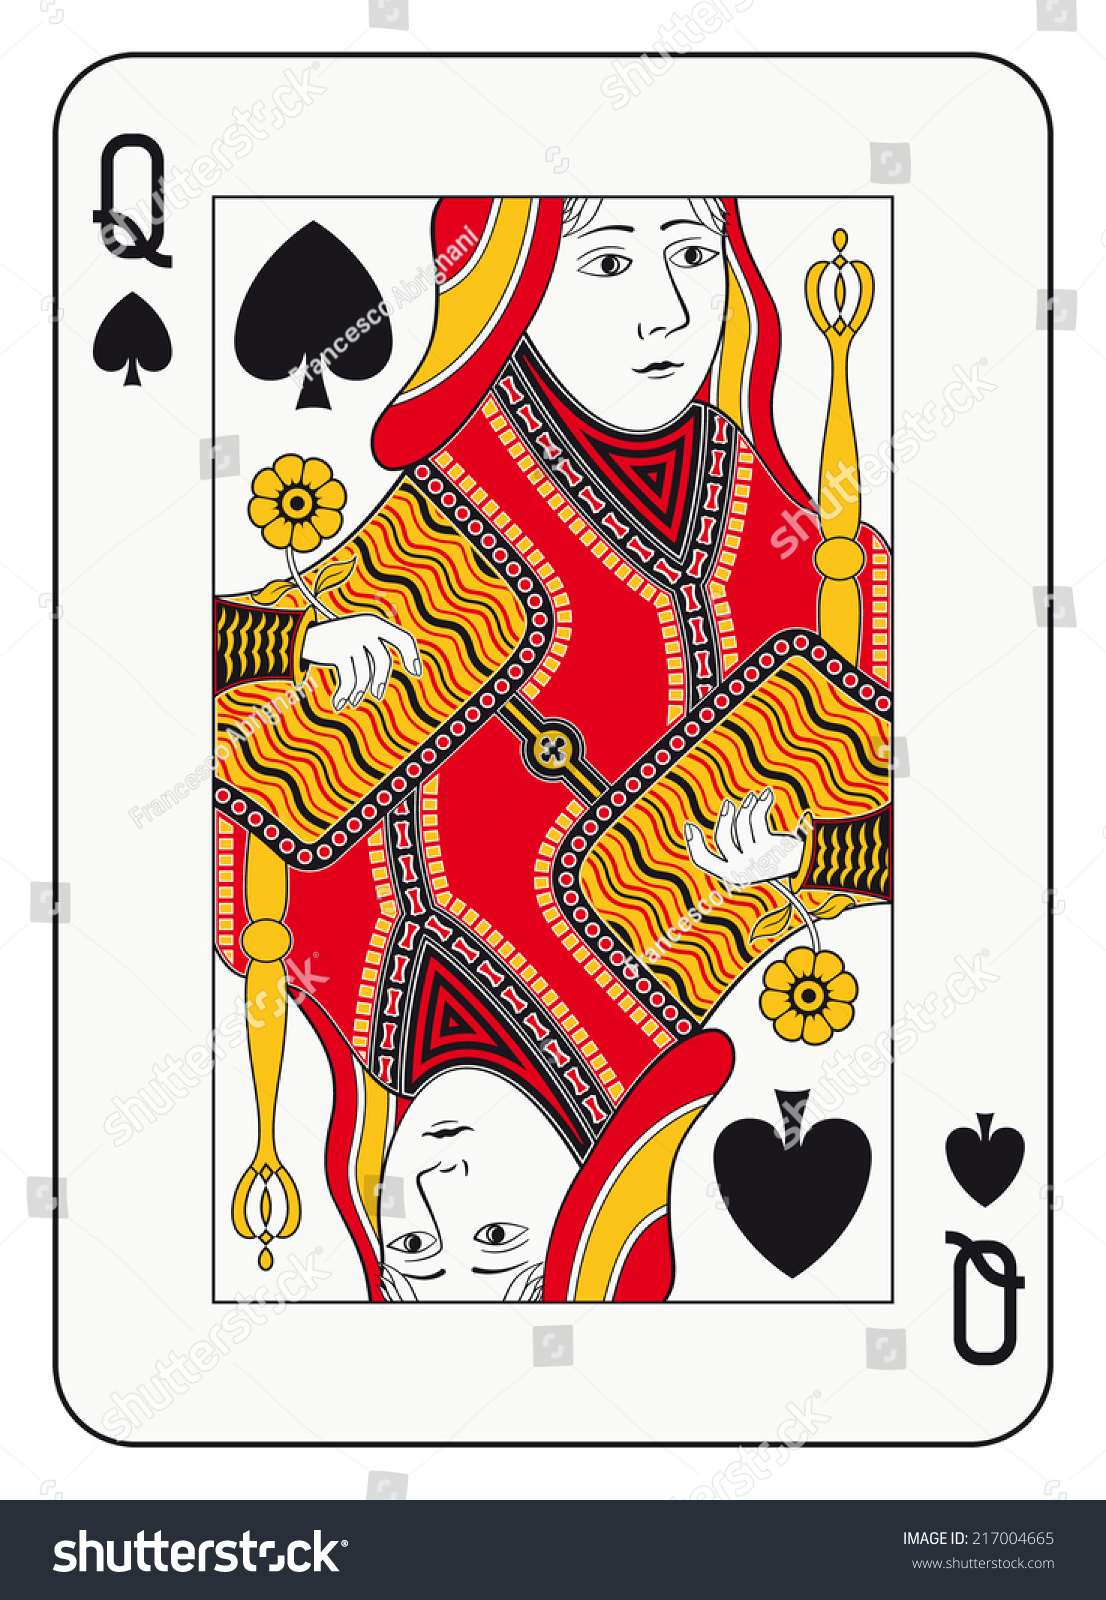 Queen Spades Playing Card Stock Illustration 217004665 | Shutterstock